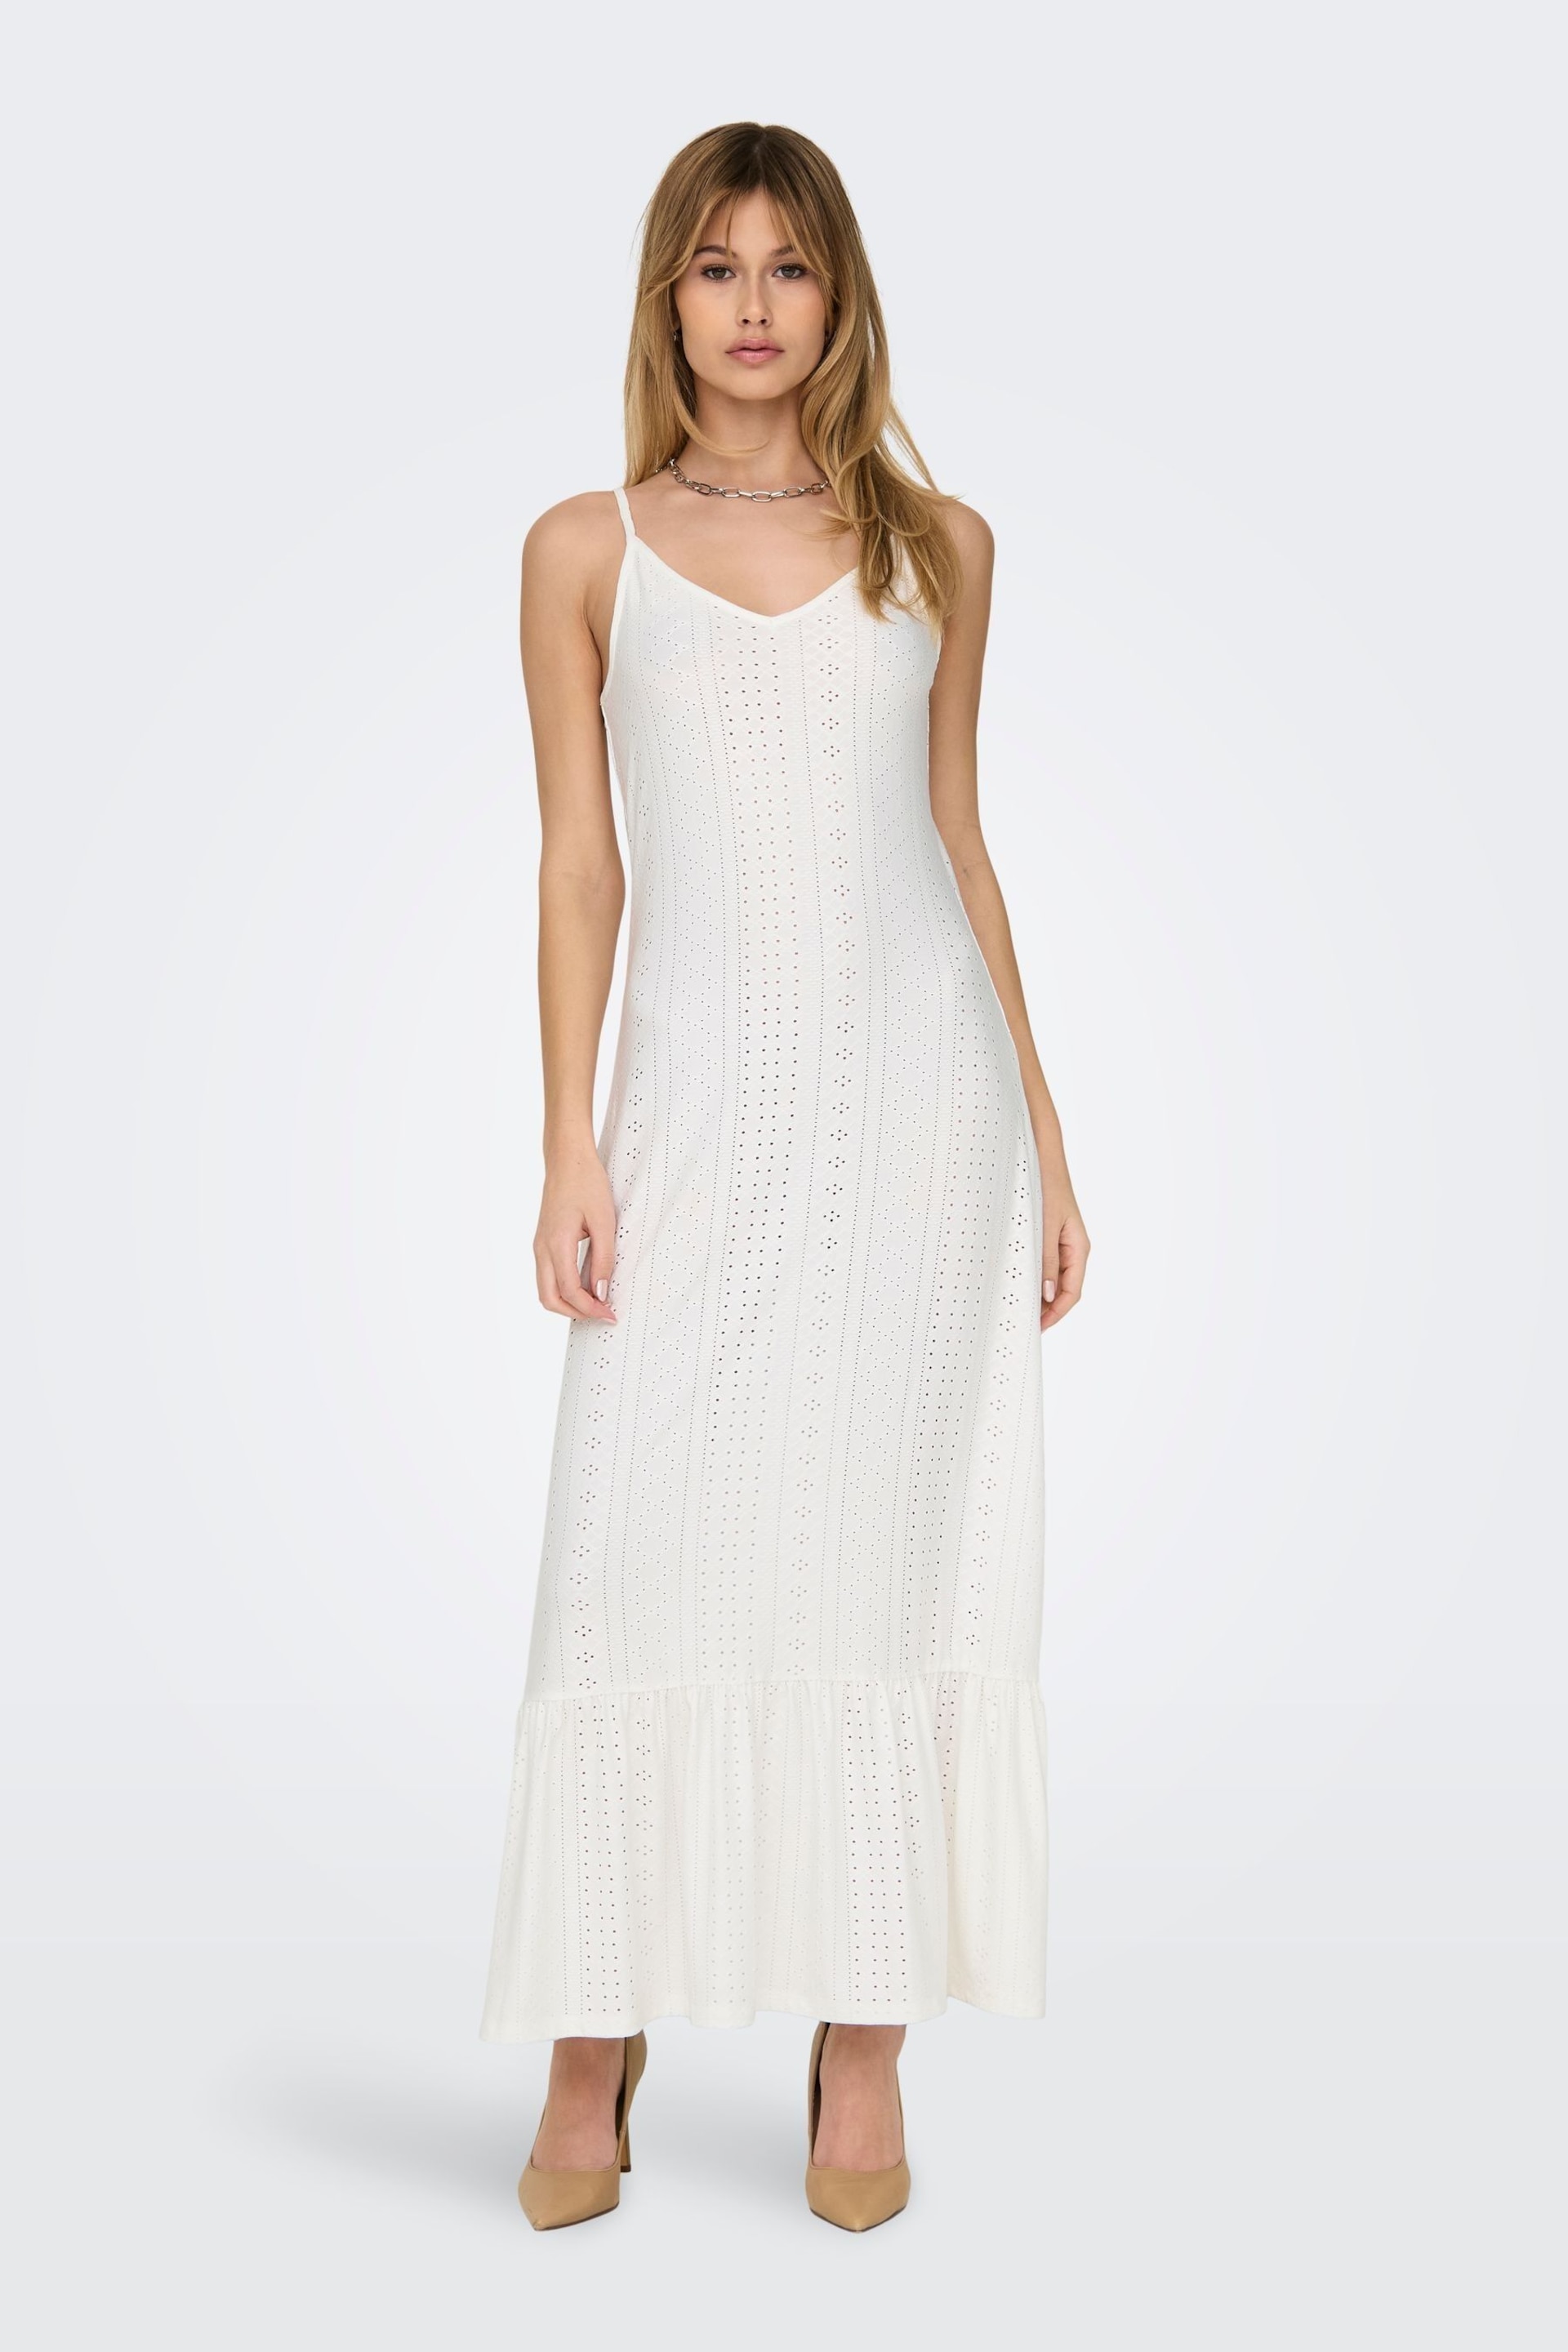 JDY White Jersey Broderie Tiered Hem Cami Maxi Dress - Image 1 of 6